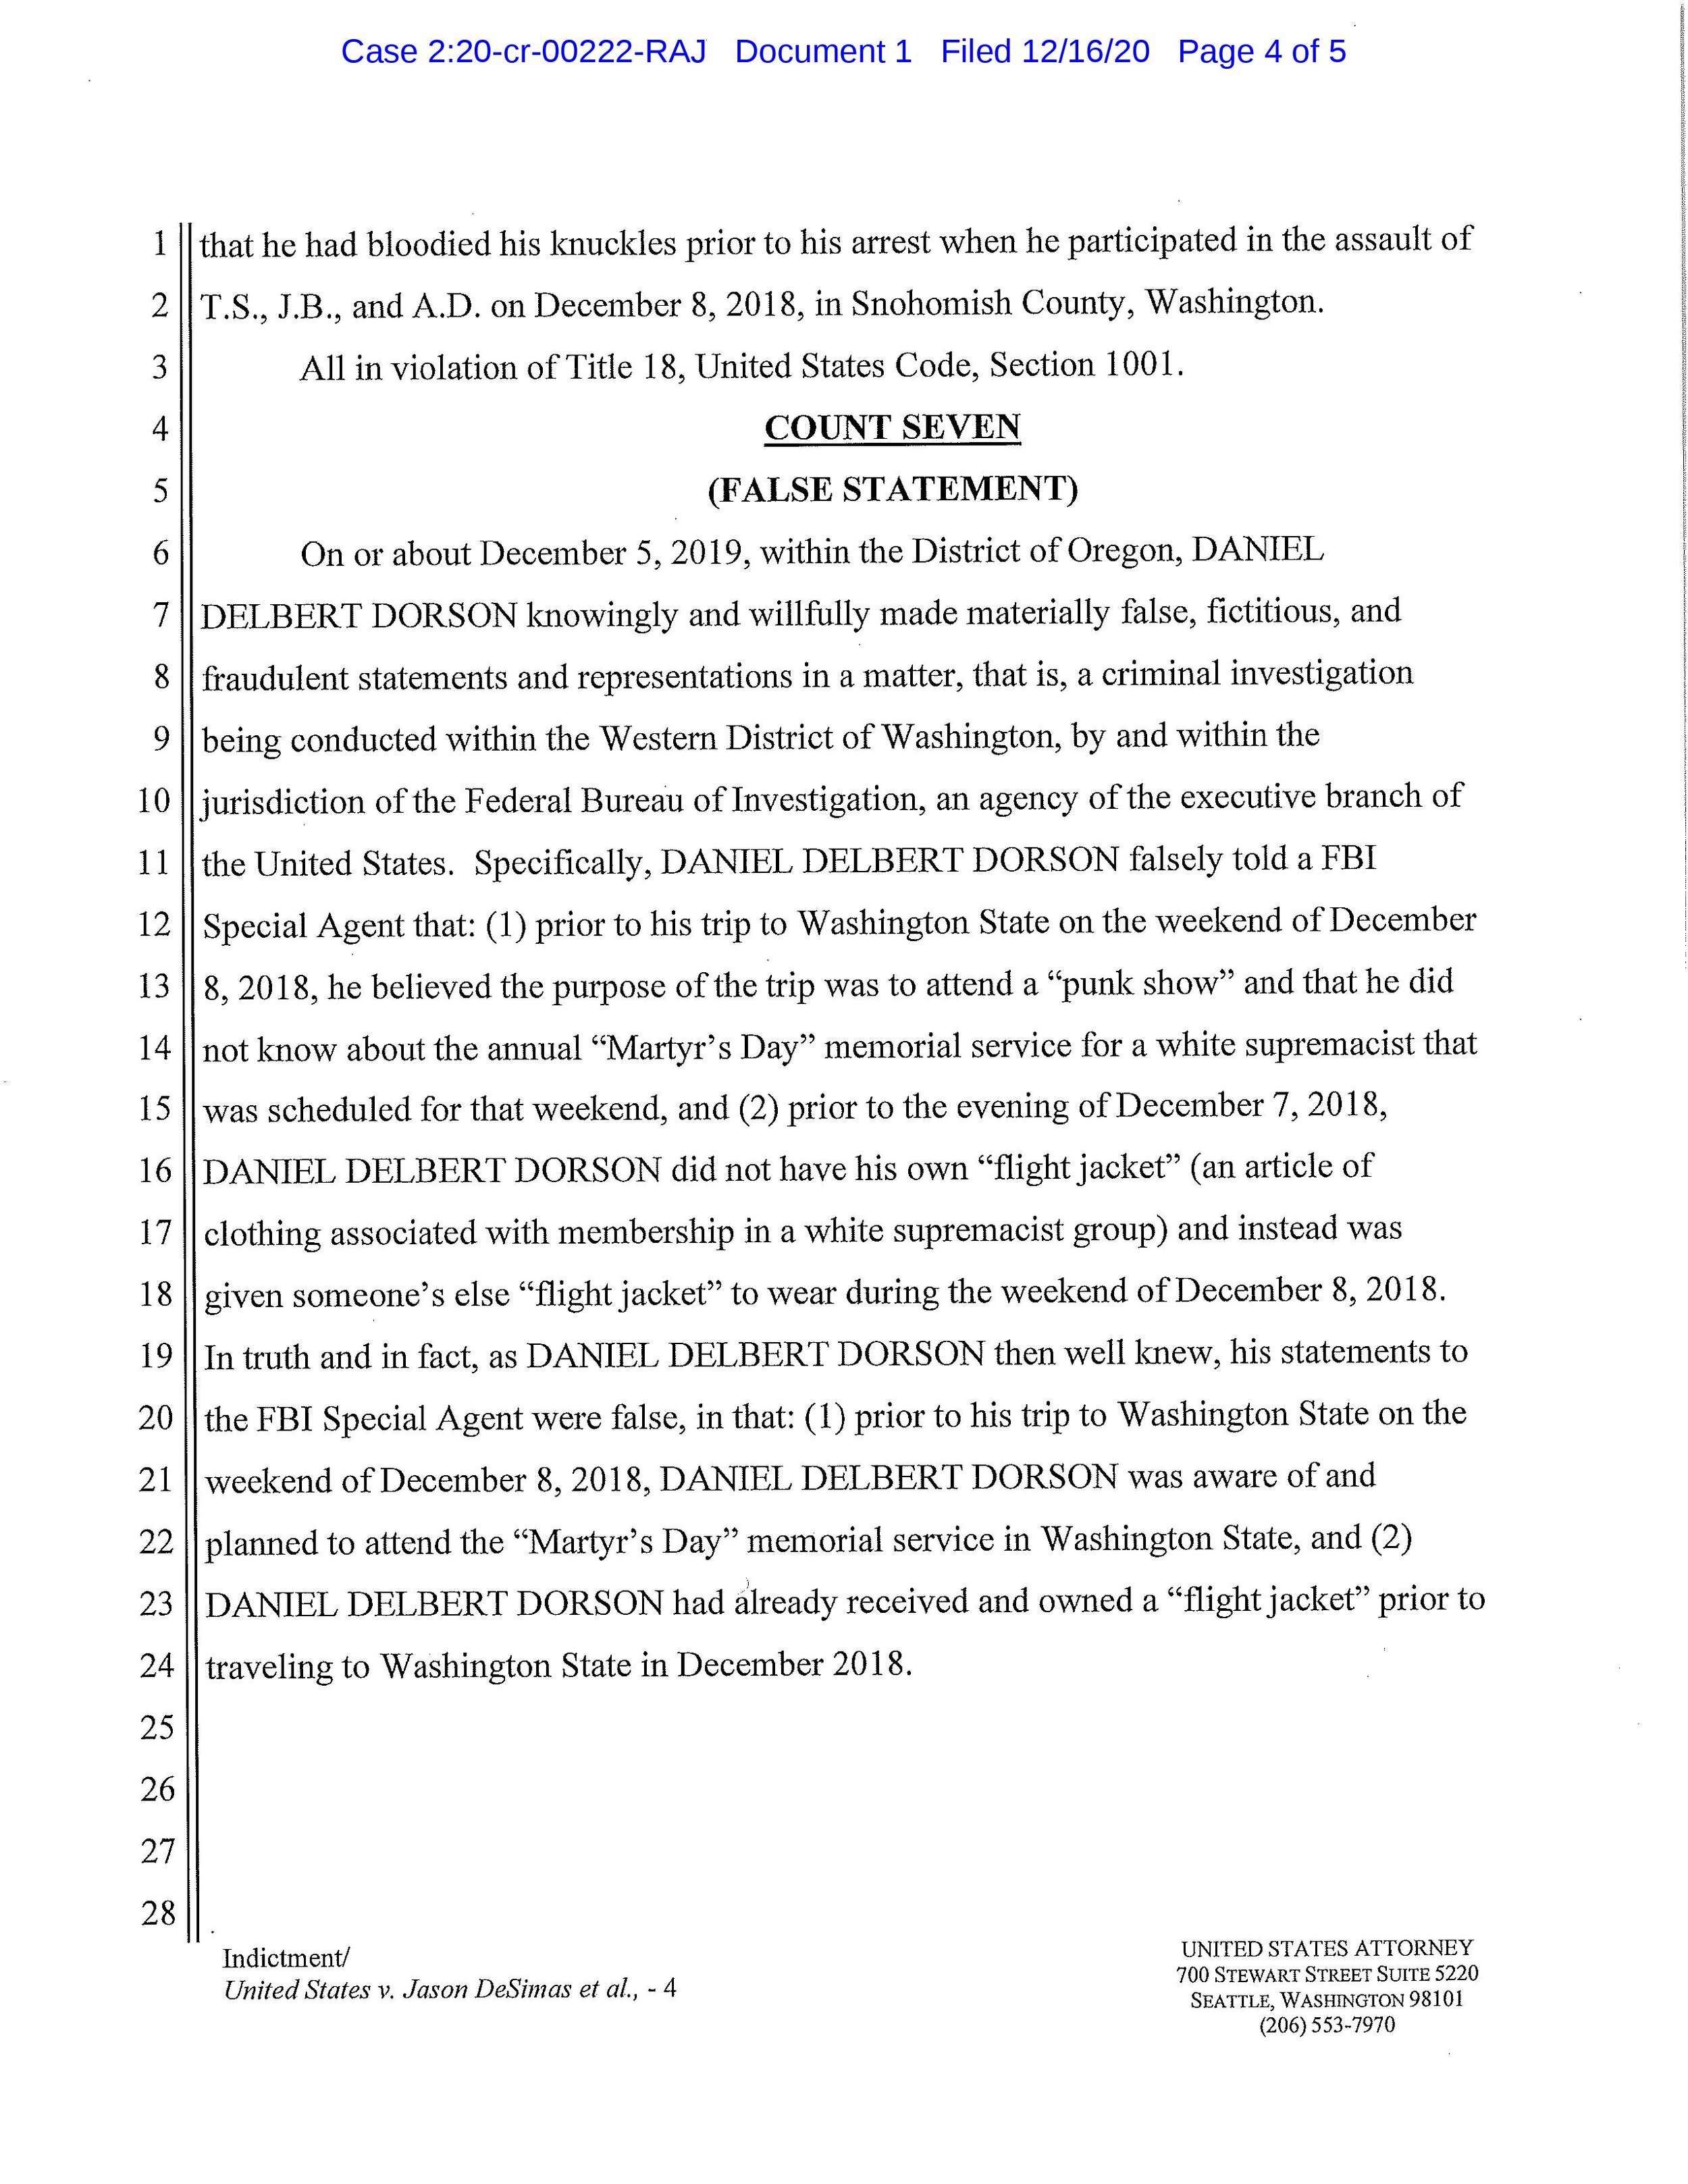 Indictment Page 4